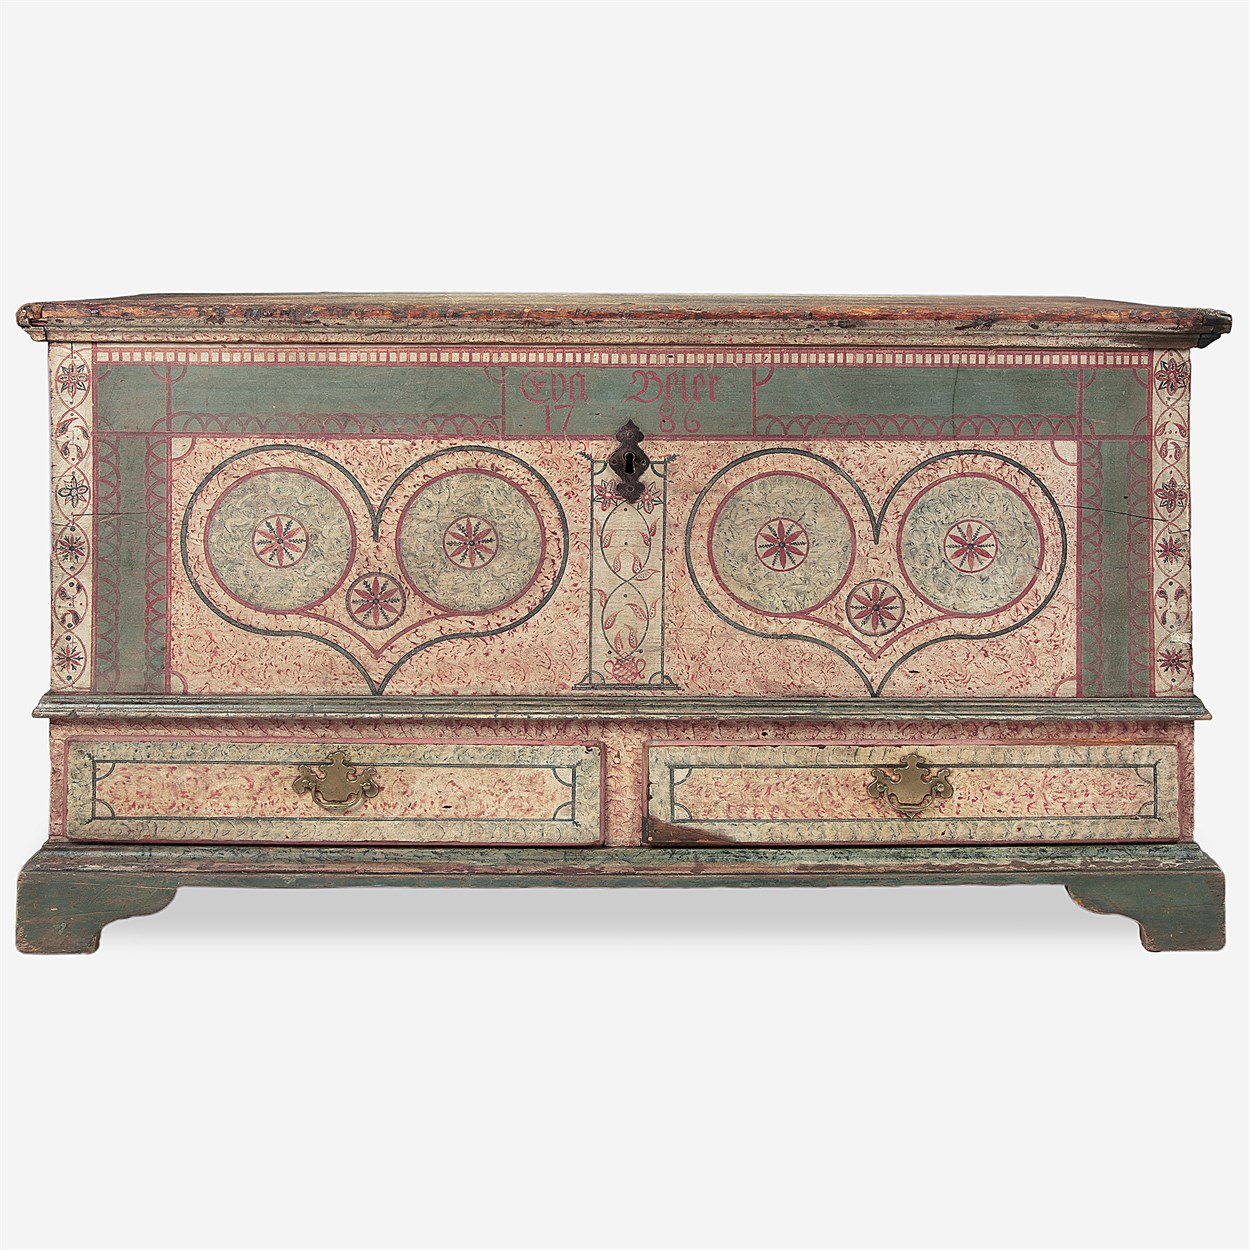 Lot 64 - A painted and decorated poplar dower chest for Eva Beier (1767-1854)